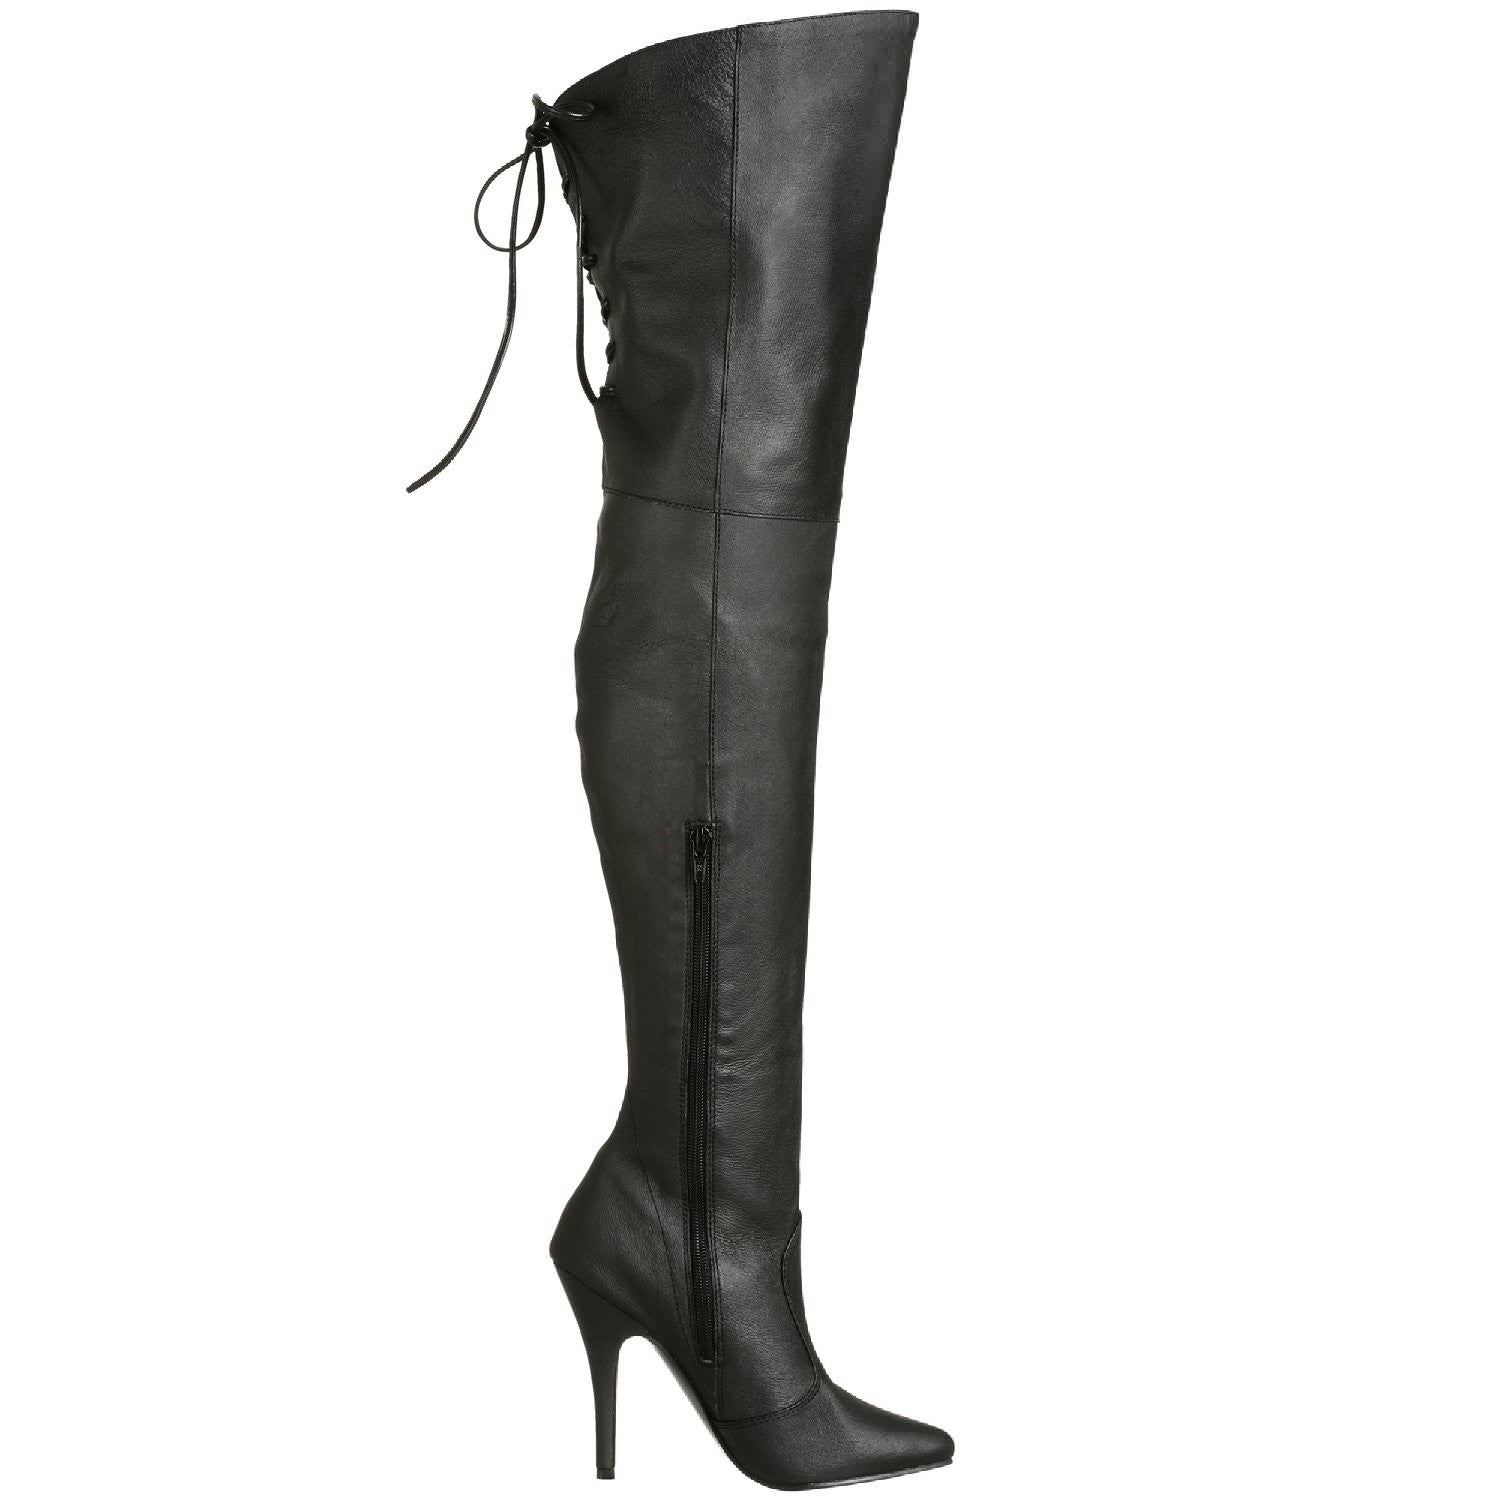 PLEASER LEGEND-8899 Black Leather Thigh High Boots